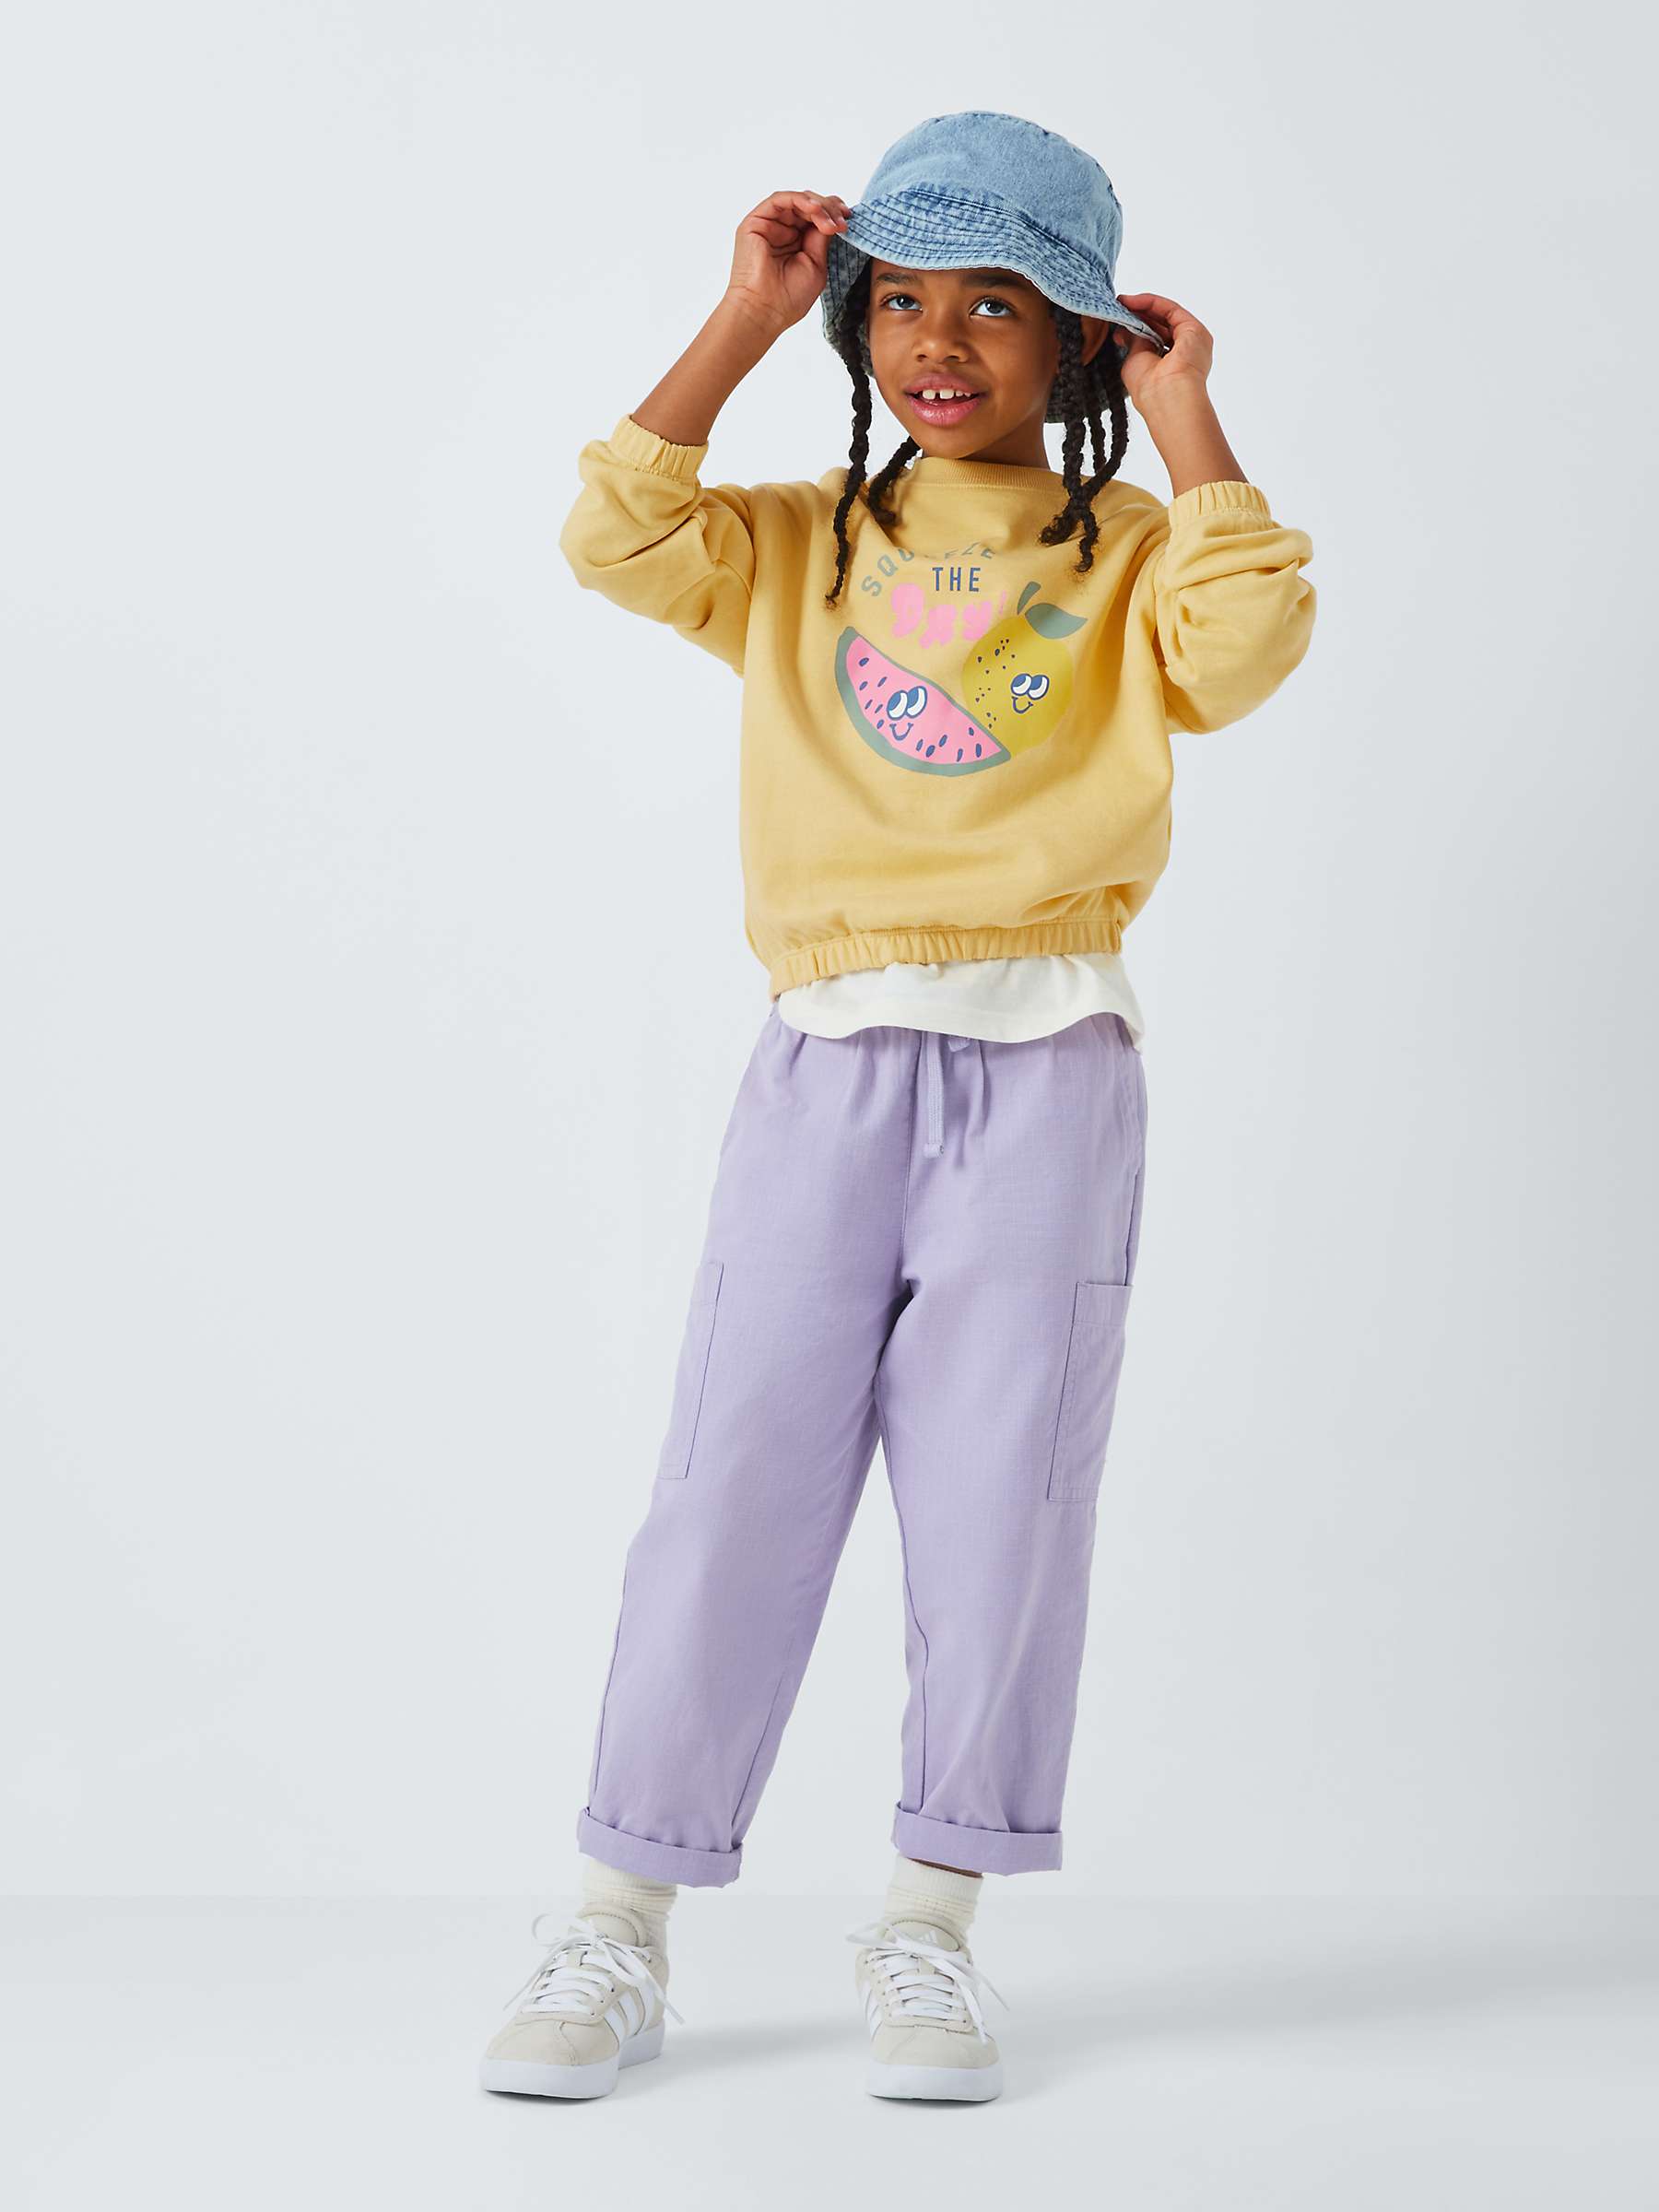 Buy John Lewis ANYDAY Kids' Squeeze The Day Top, Yellow Online at johnlewis.com